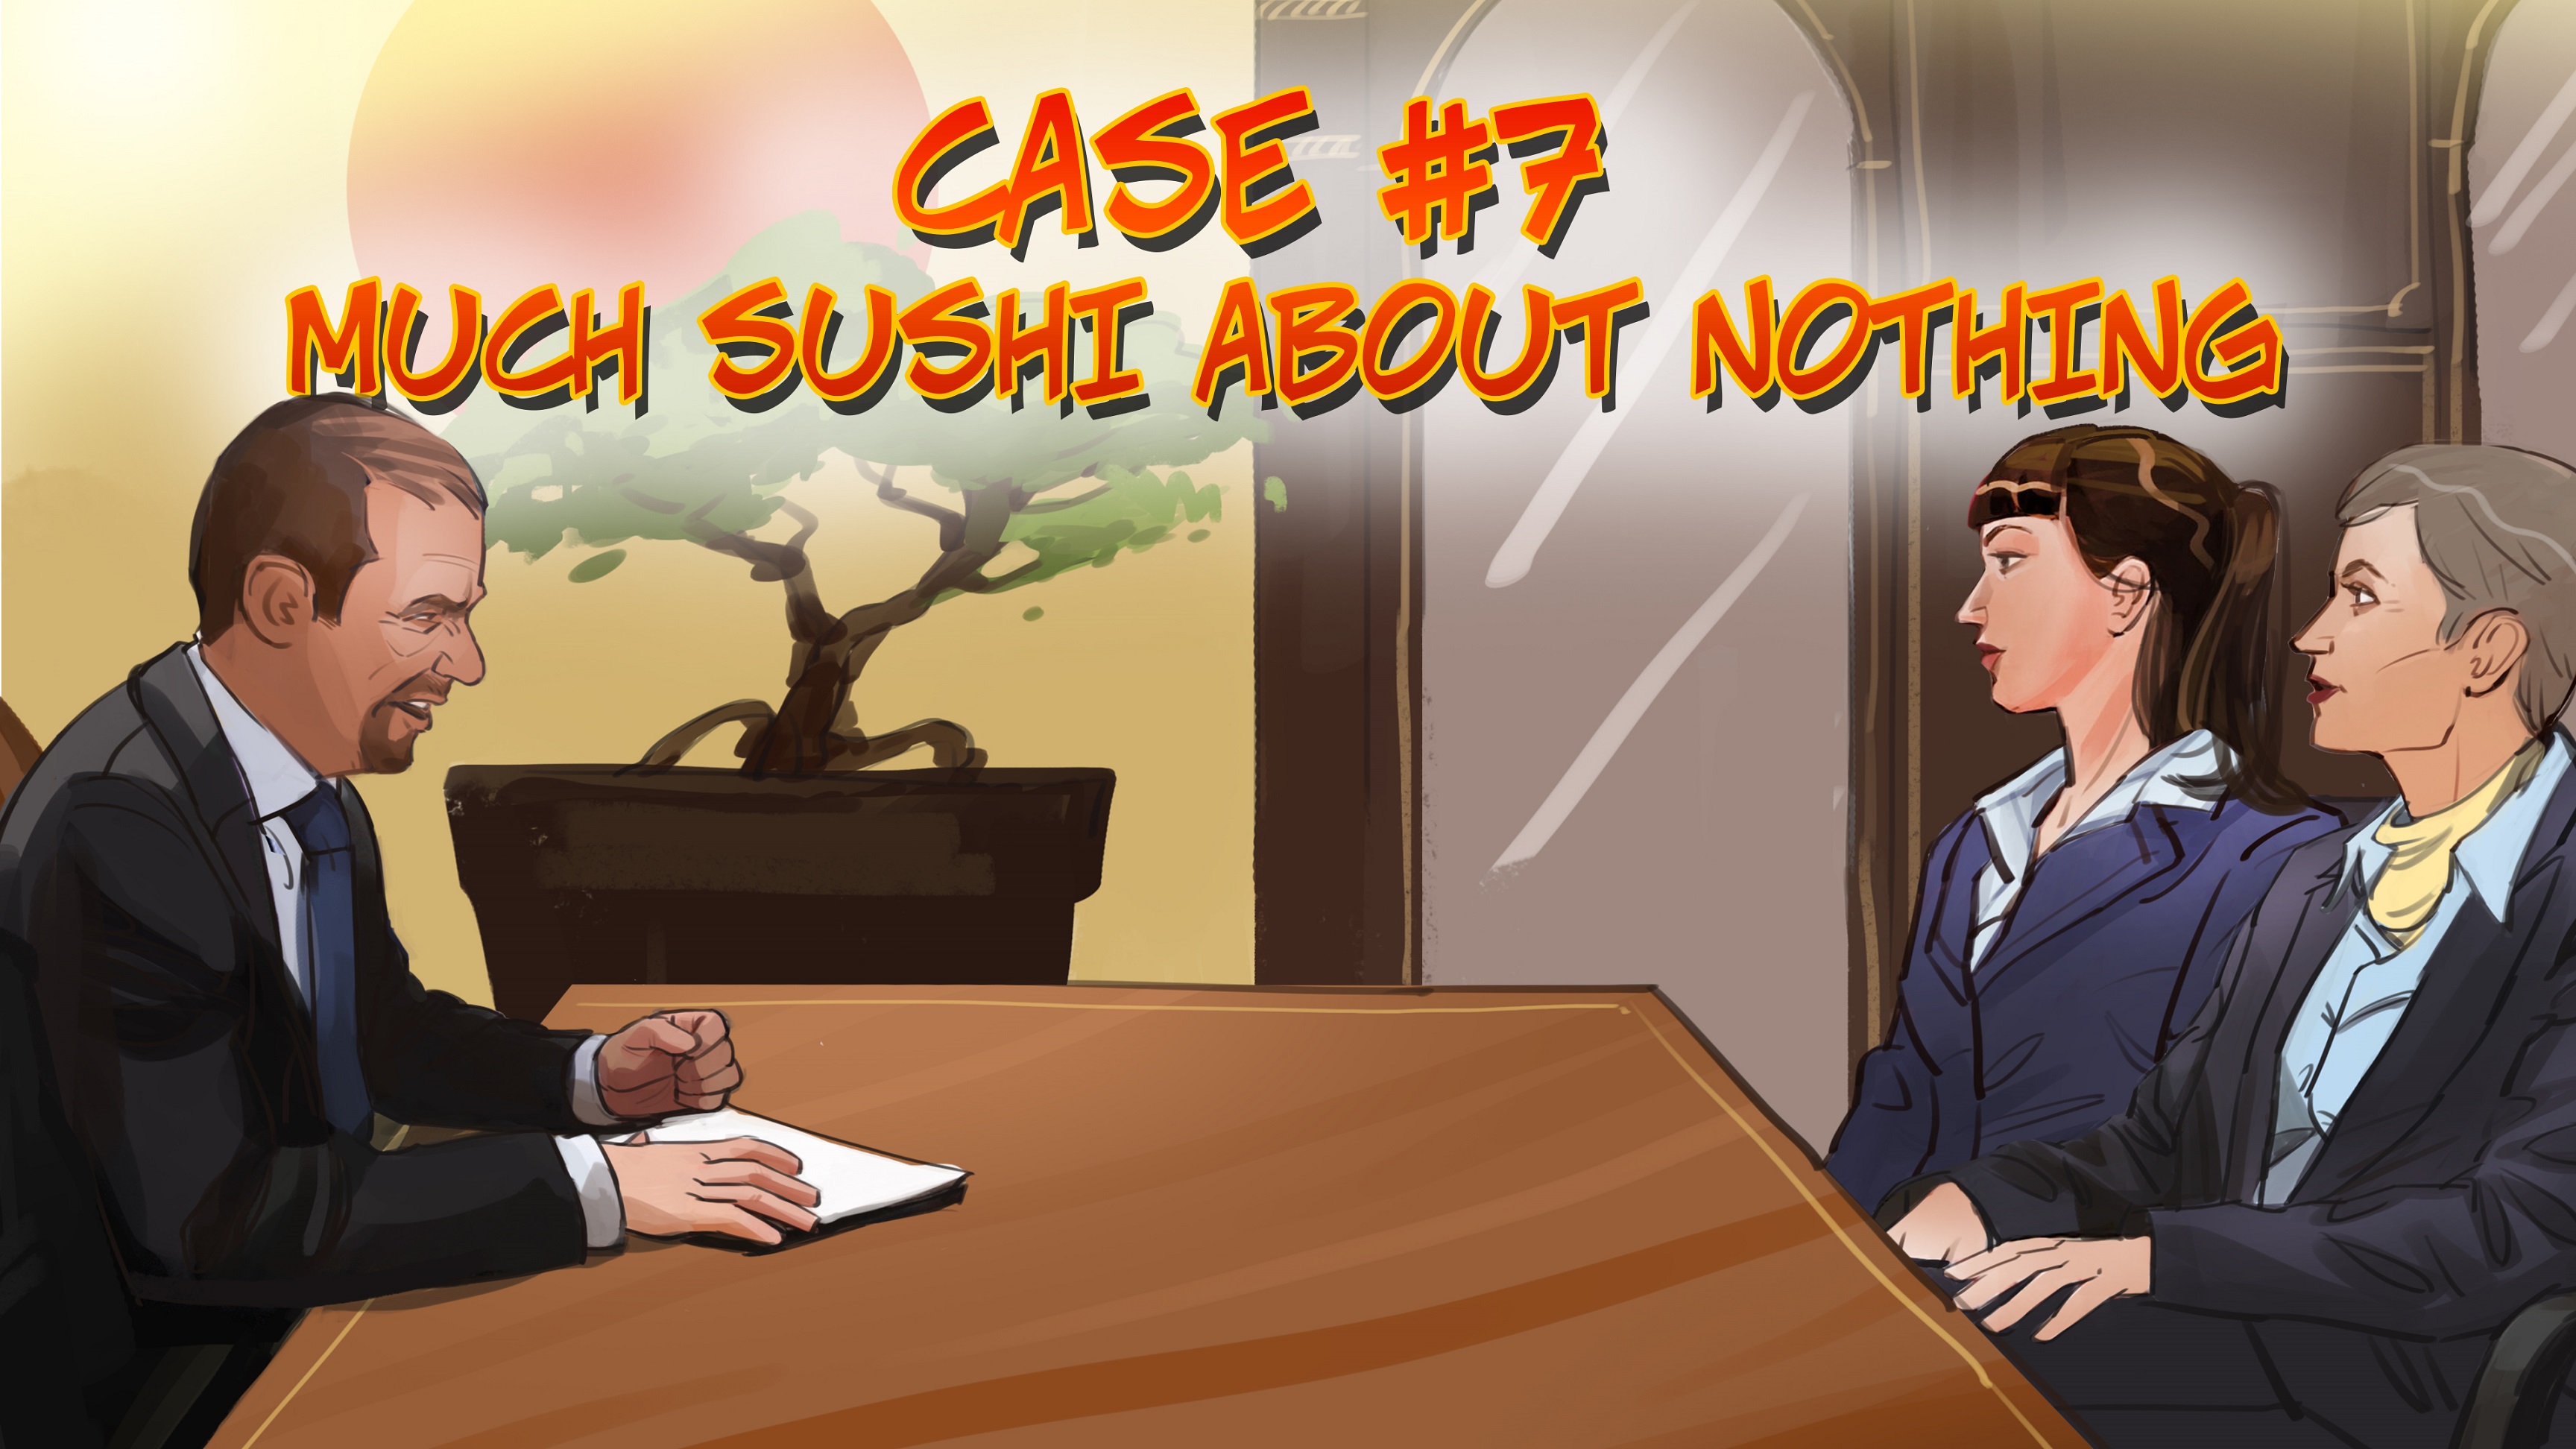 EXPERT DISCOVERY presents the seventh episode of “Forensica. Season One” – “Case №7. Much Sushi about Nothing”.